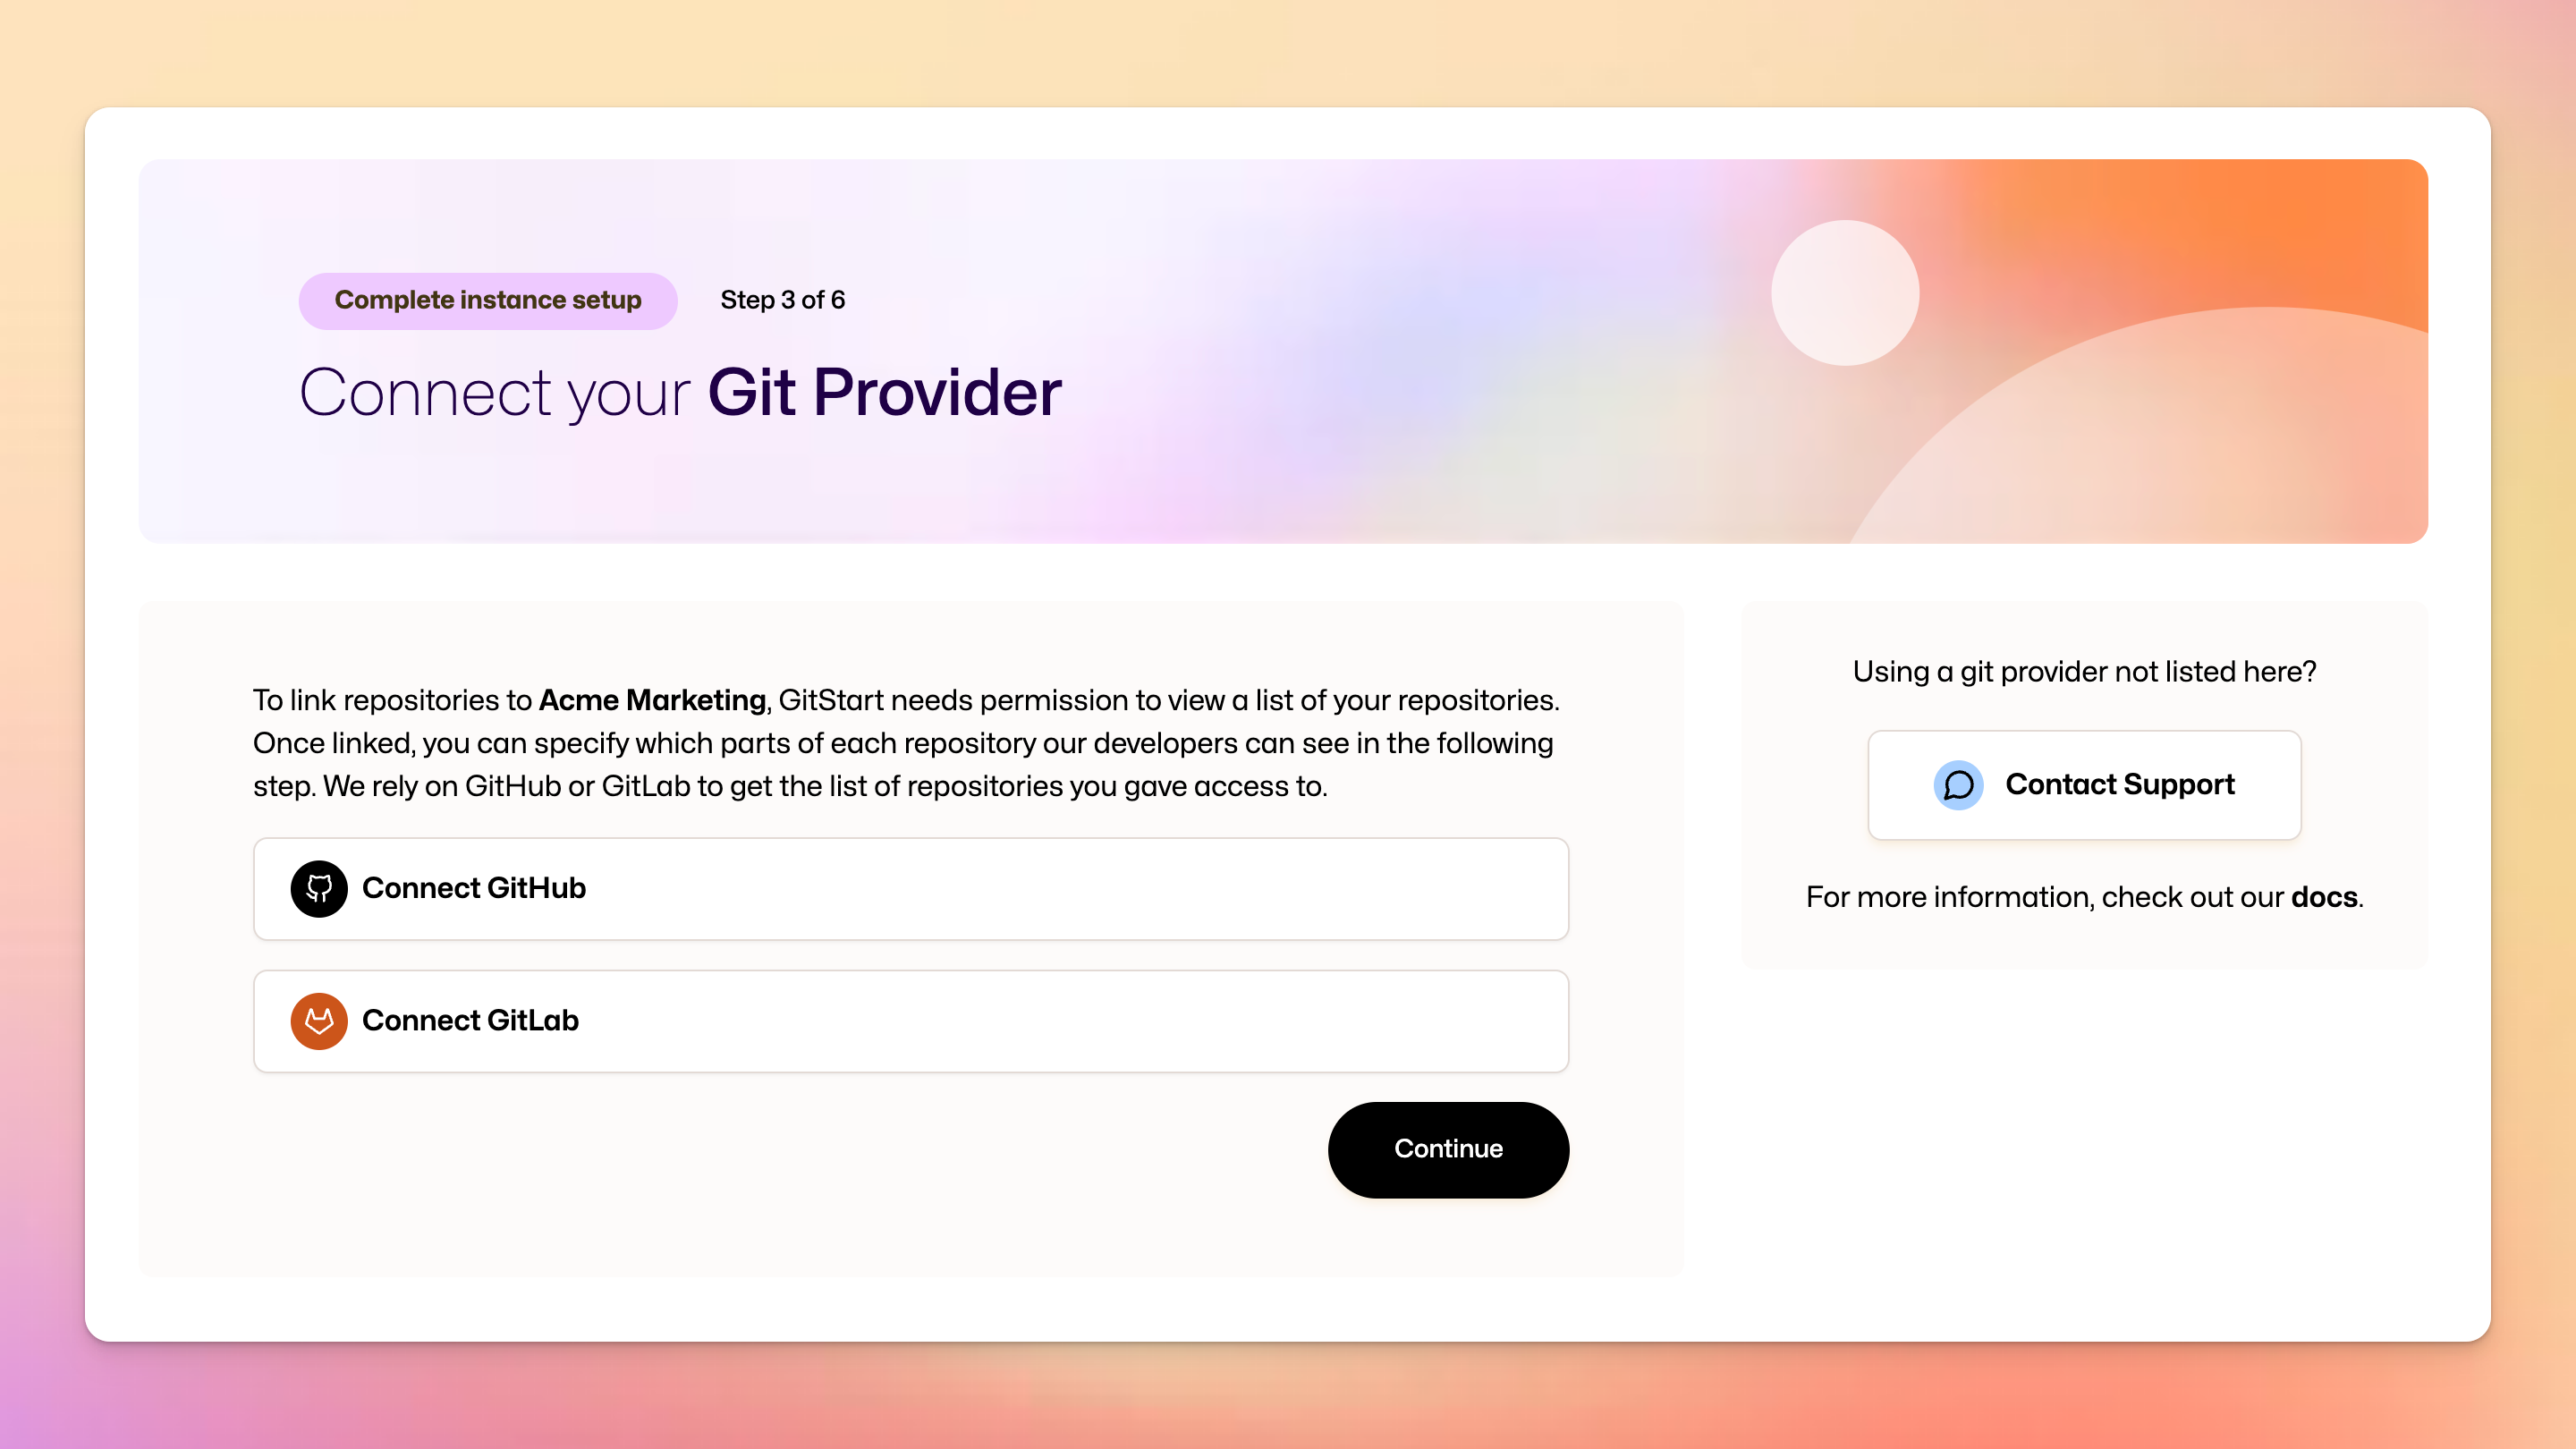 Connect your Git Provider step